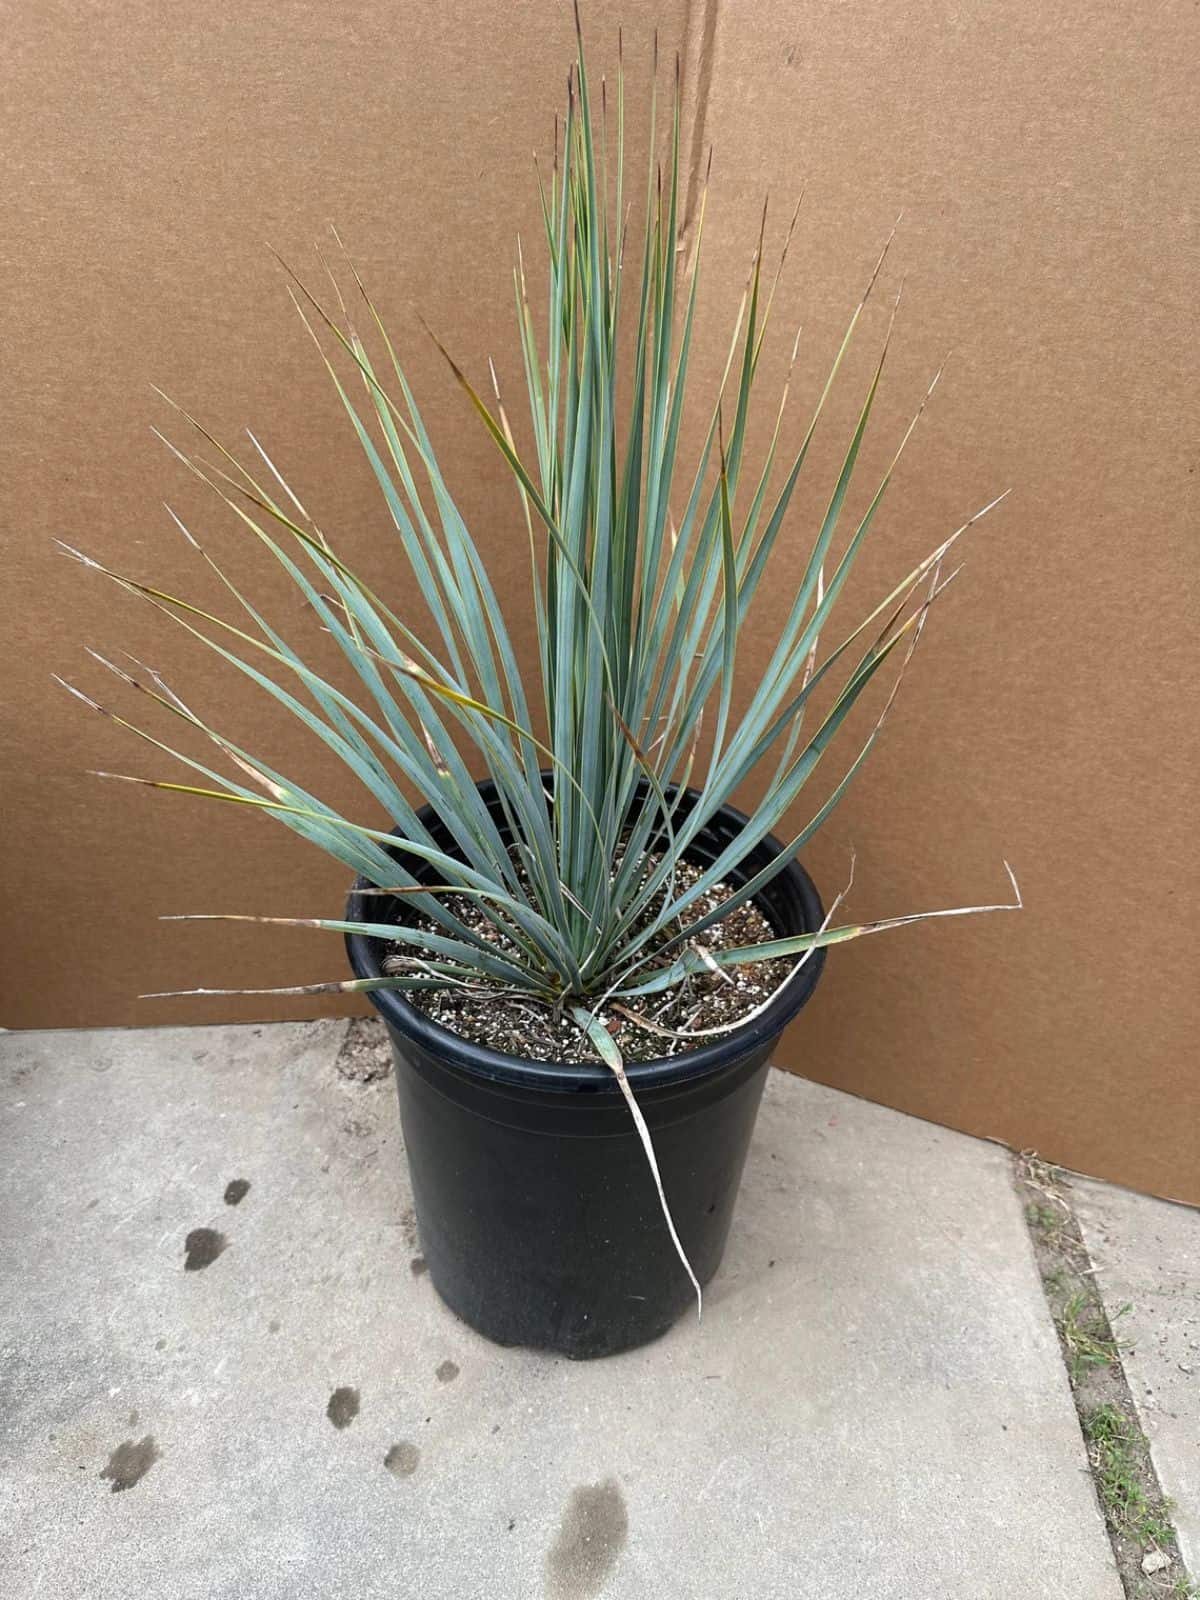 Beaked Yucca Plant grows in a plastic pot.